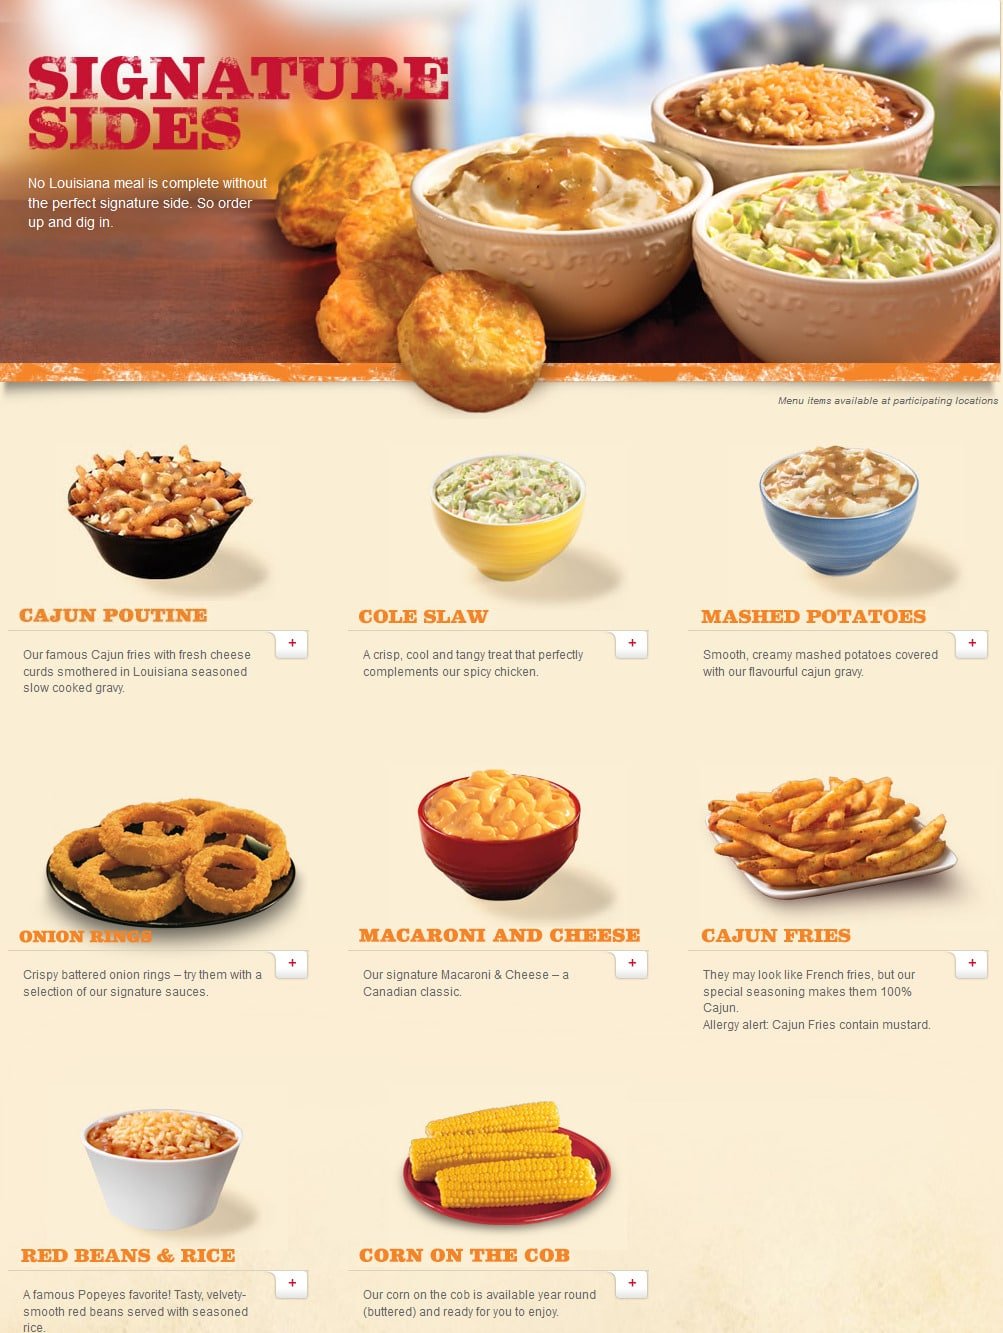 Popeyes Menu and Specials